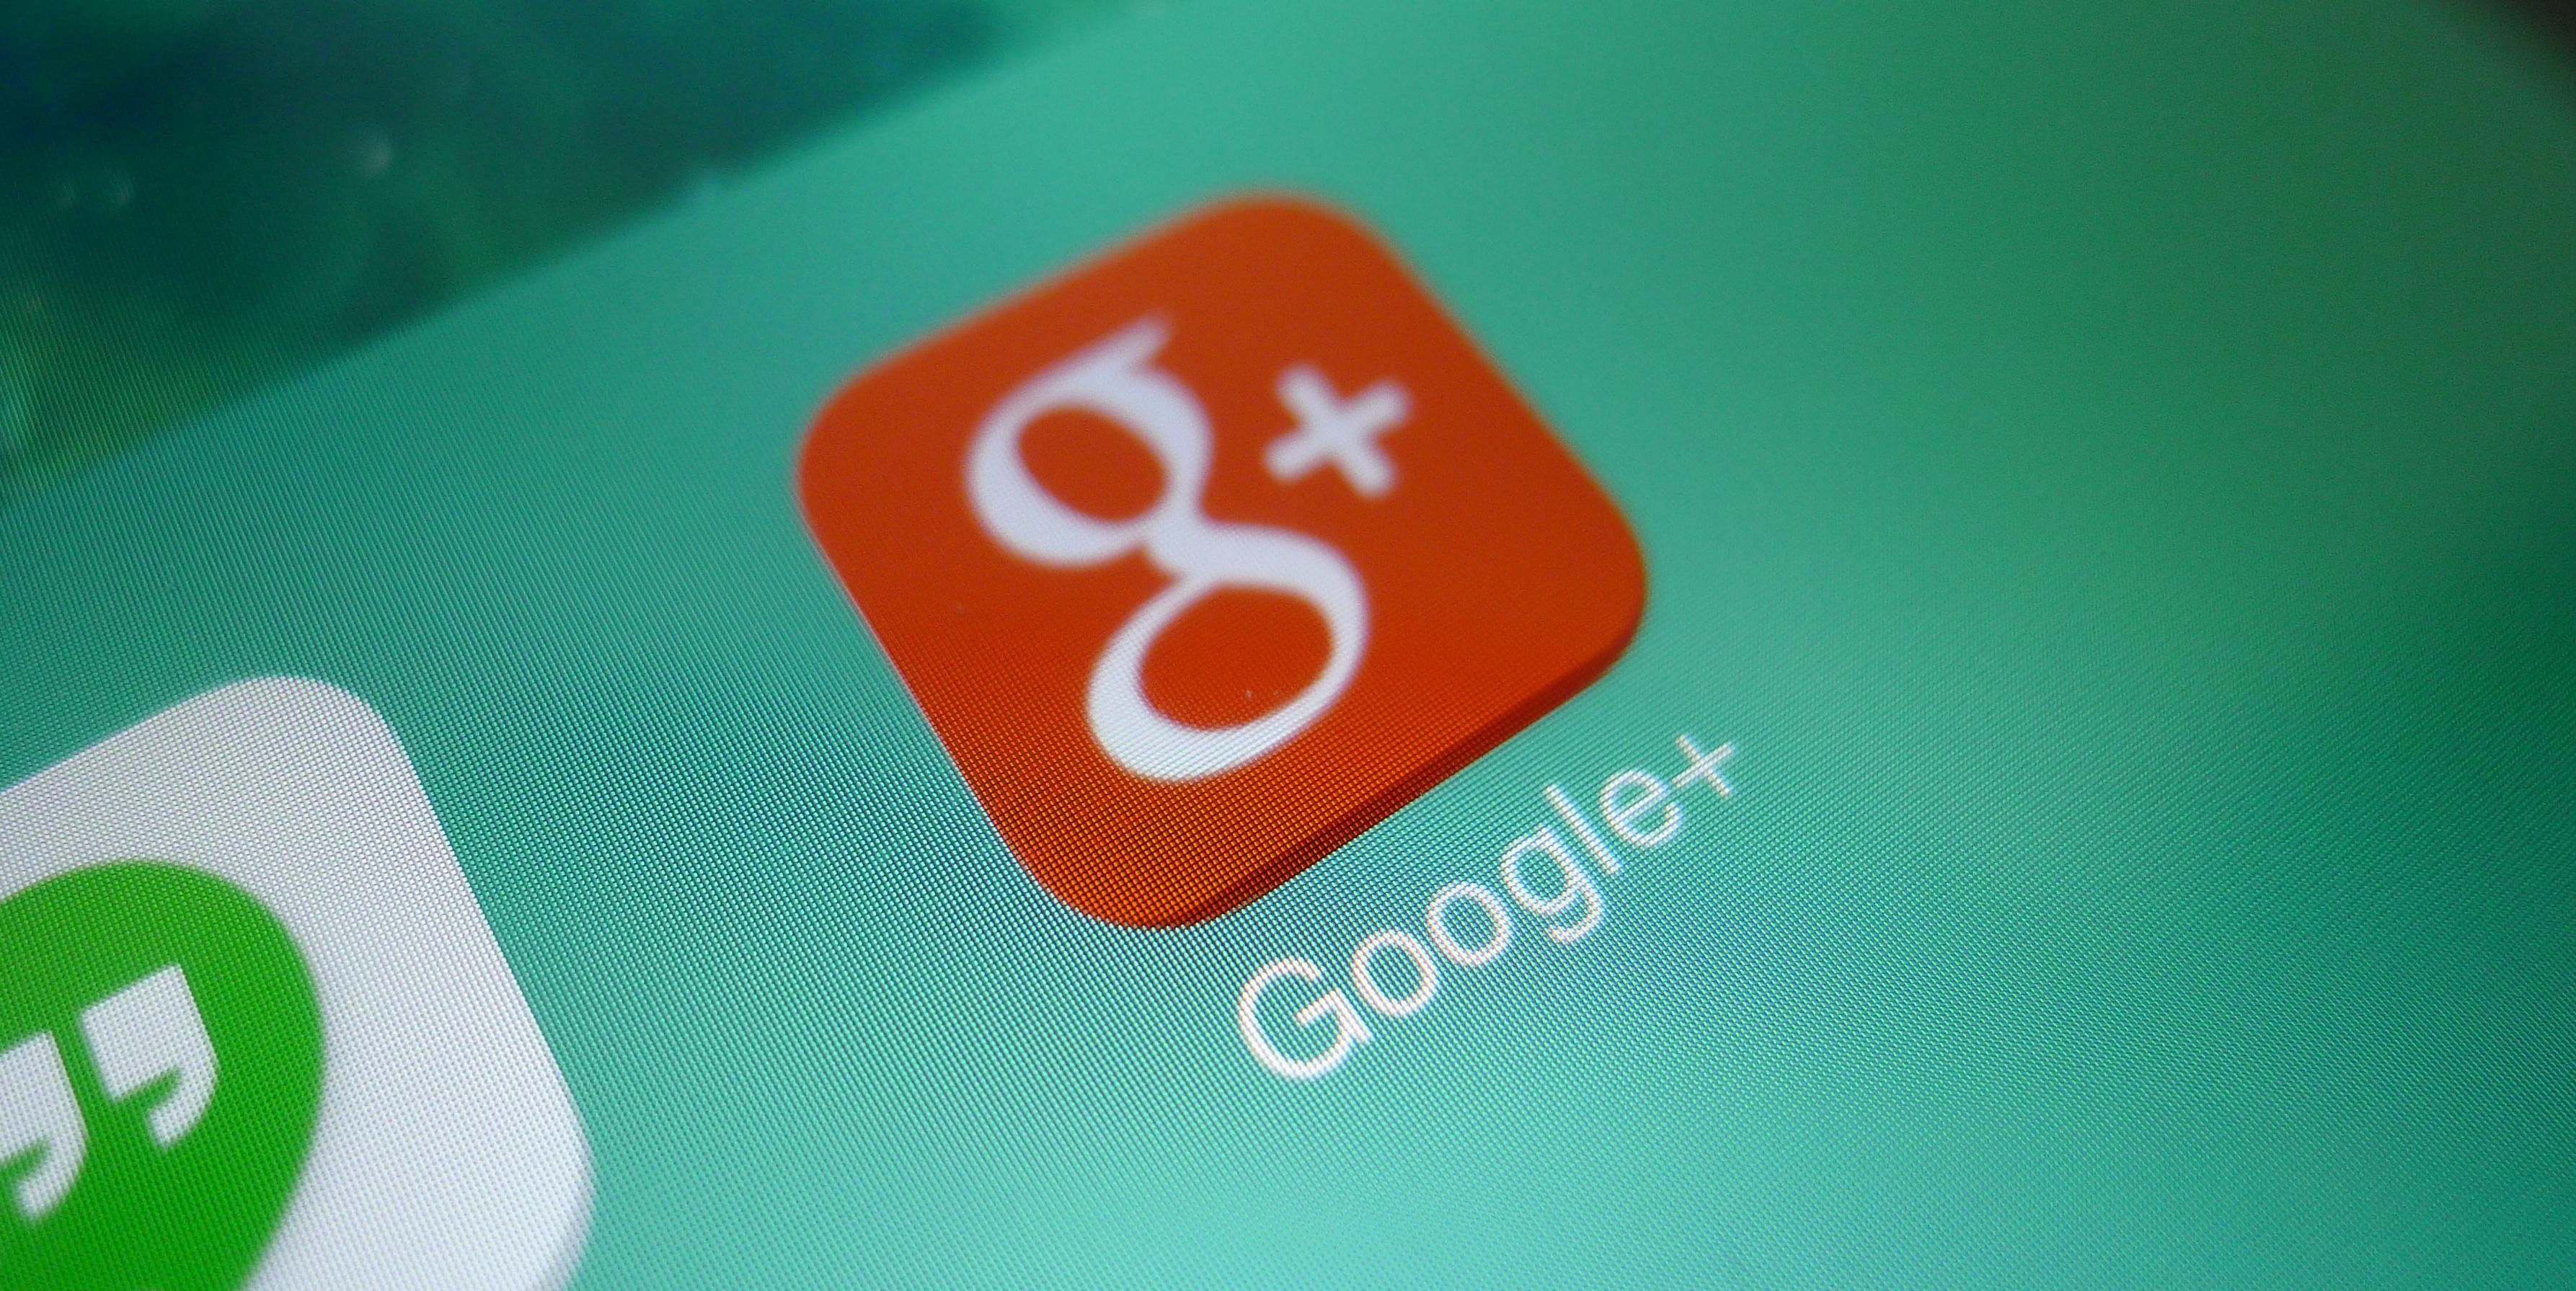 11 Quick Ideas to Post On Google+